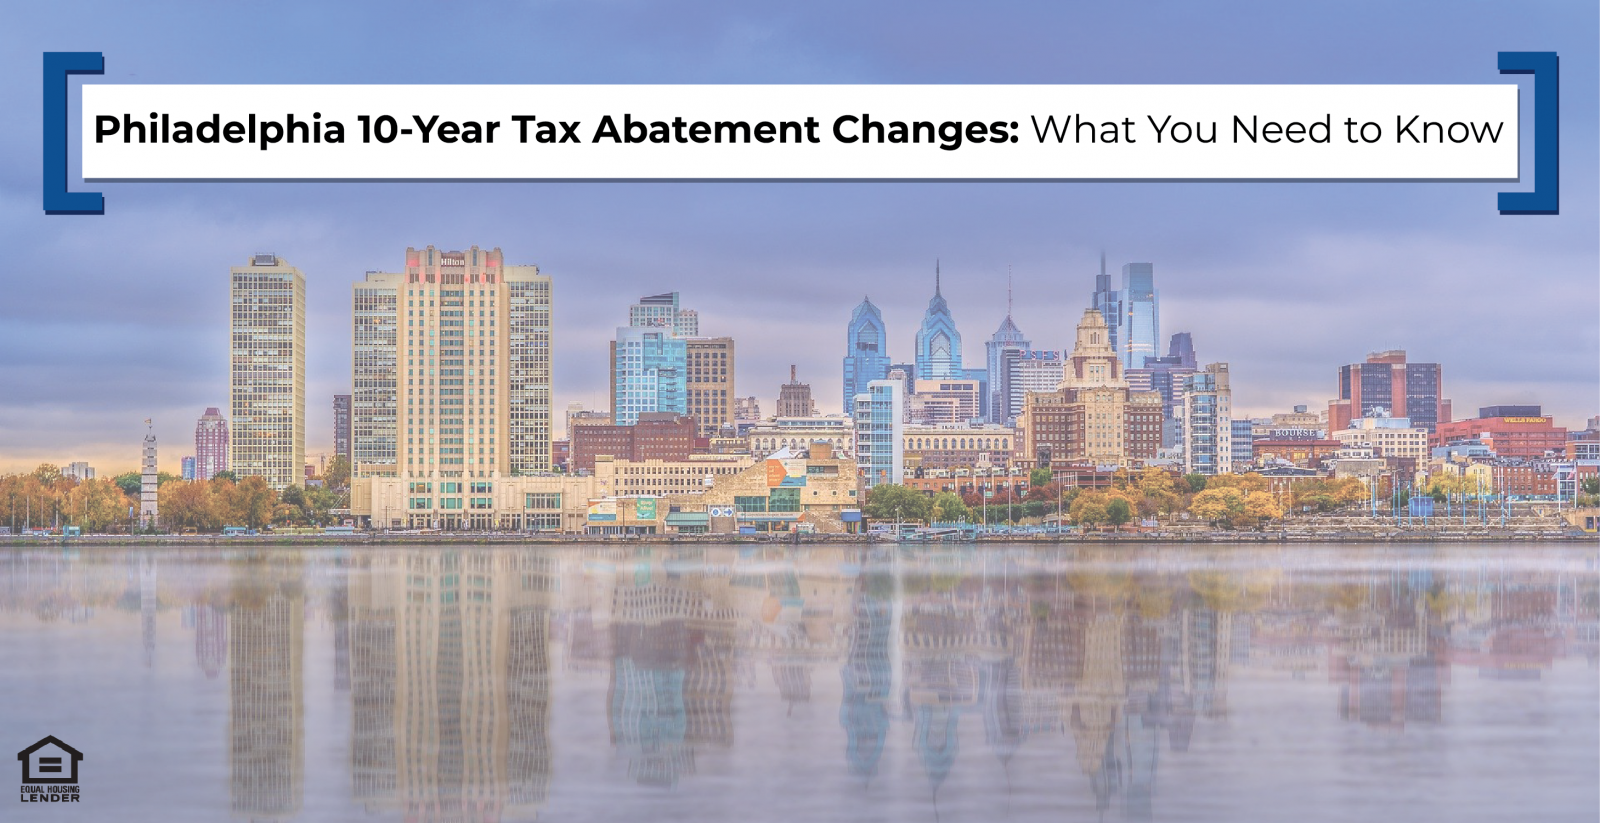 Philadelphia 10-Year Tax Abatement Changes: What You Need to Know